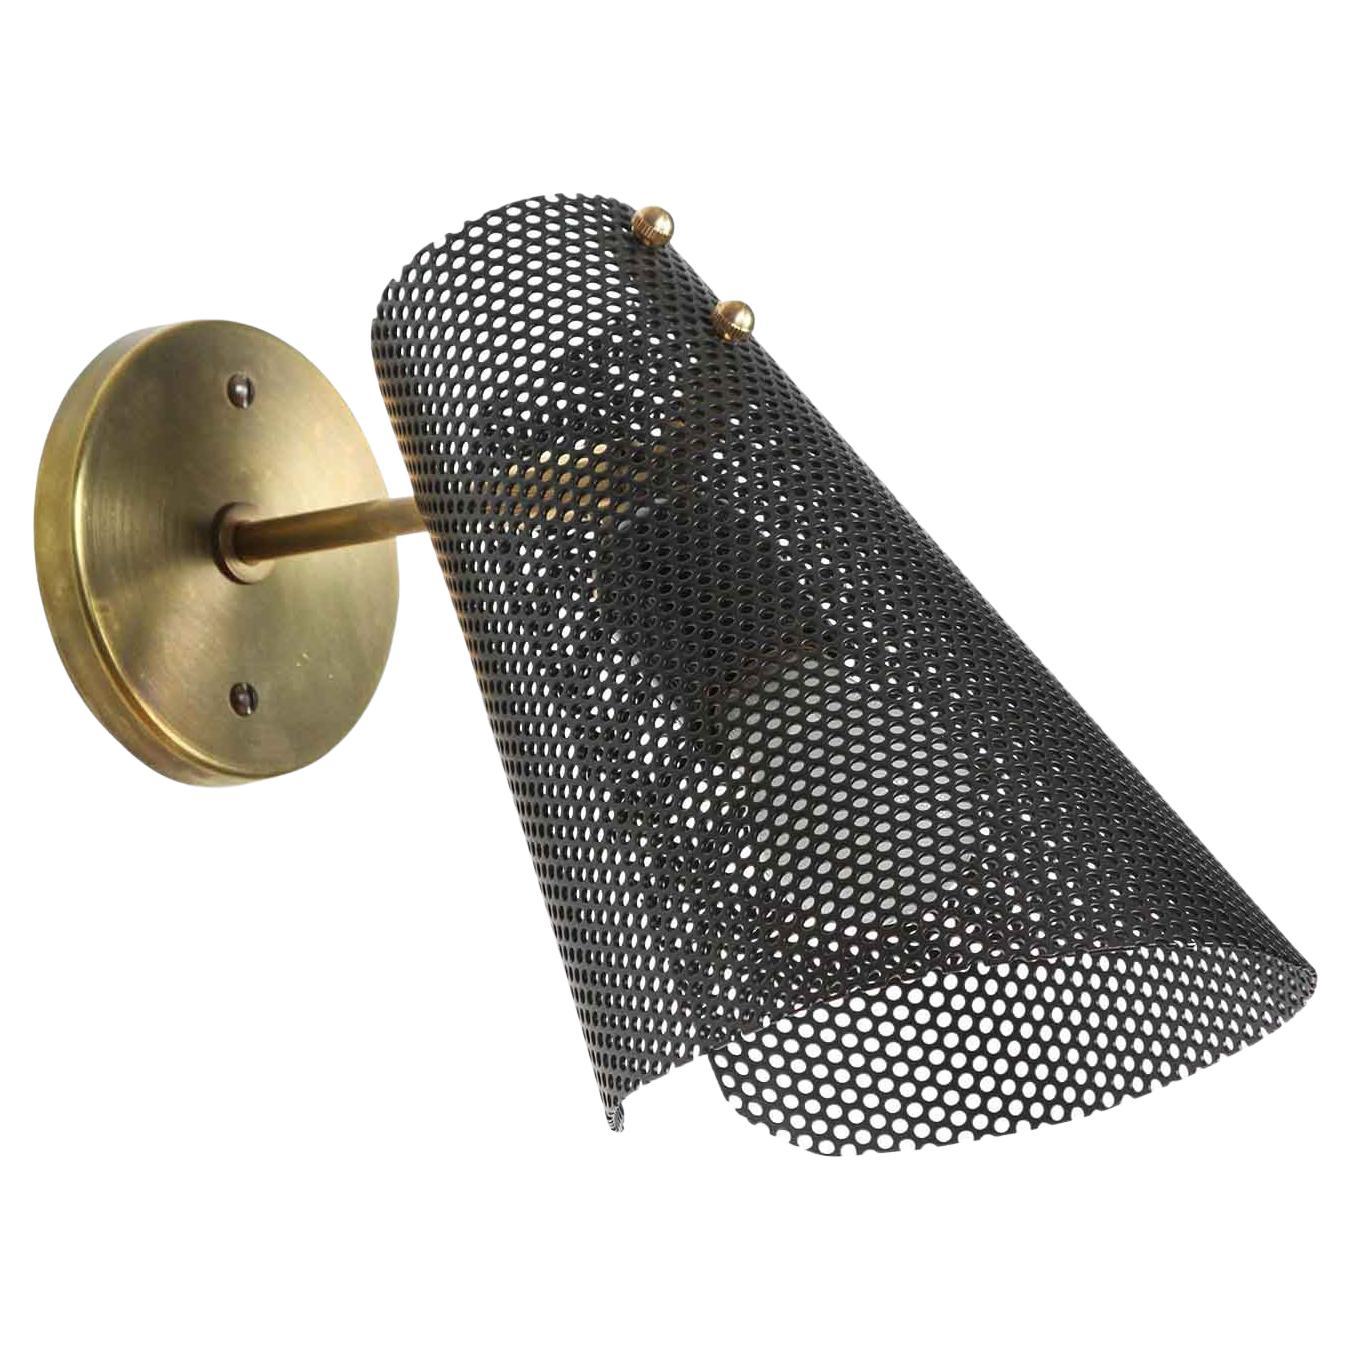 Black Perforated Scoop Sconce by Lawson-Fenning For Sale